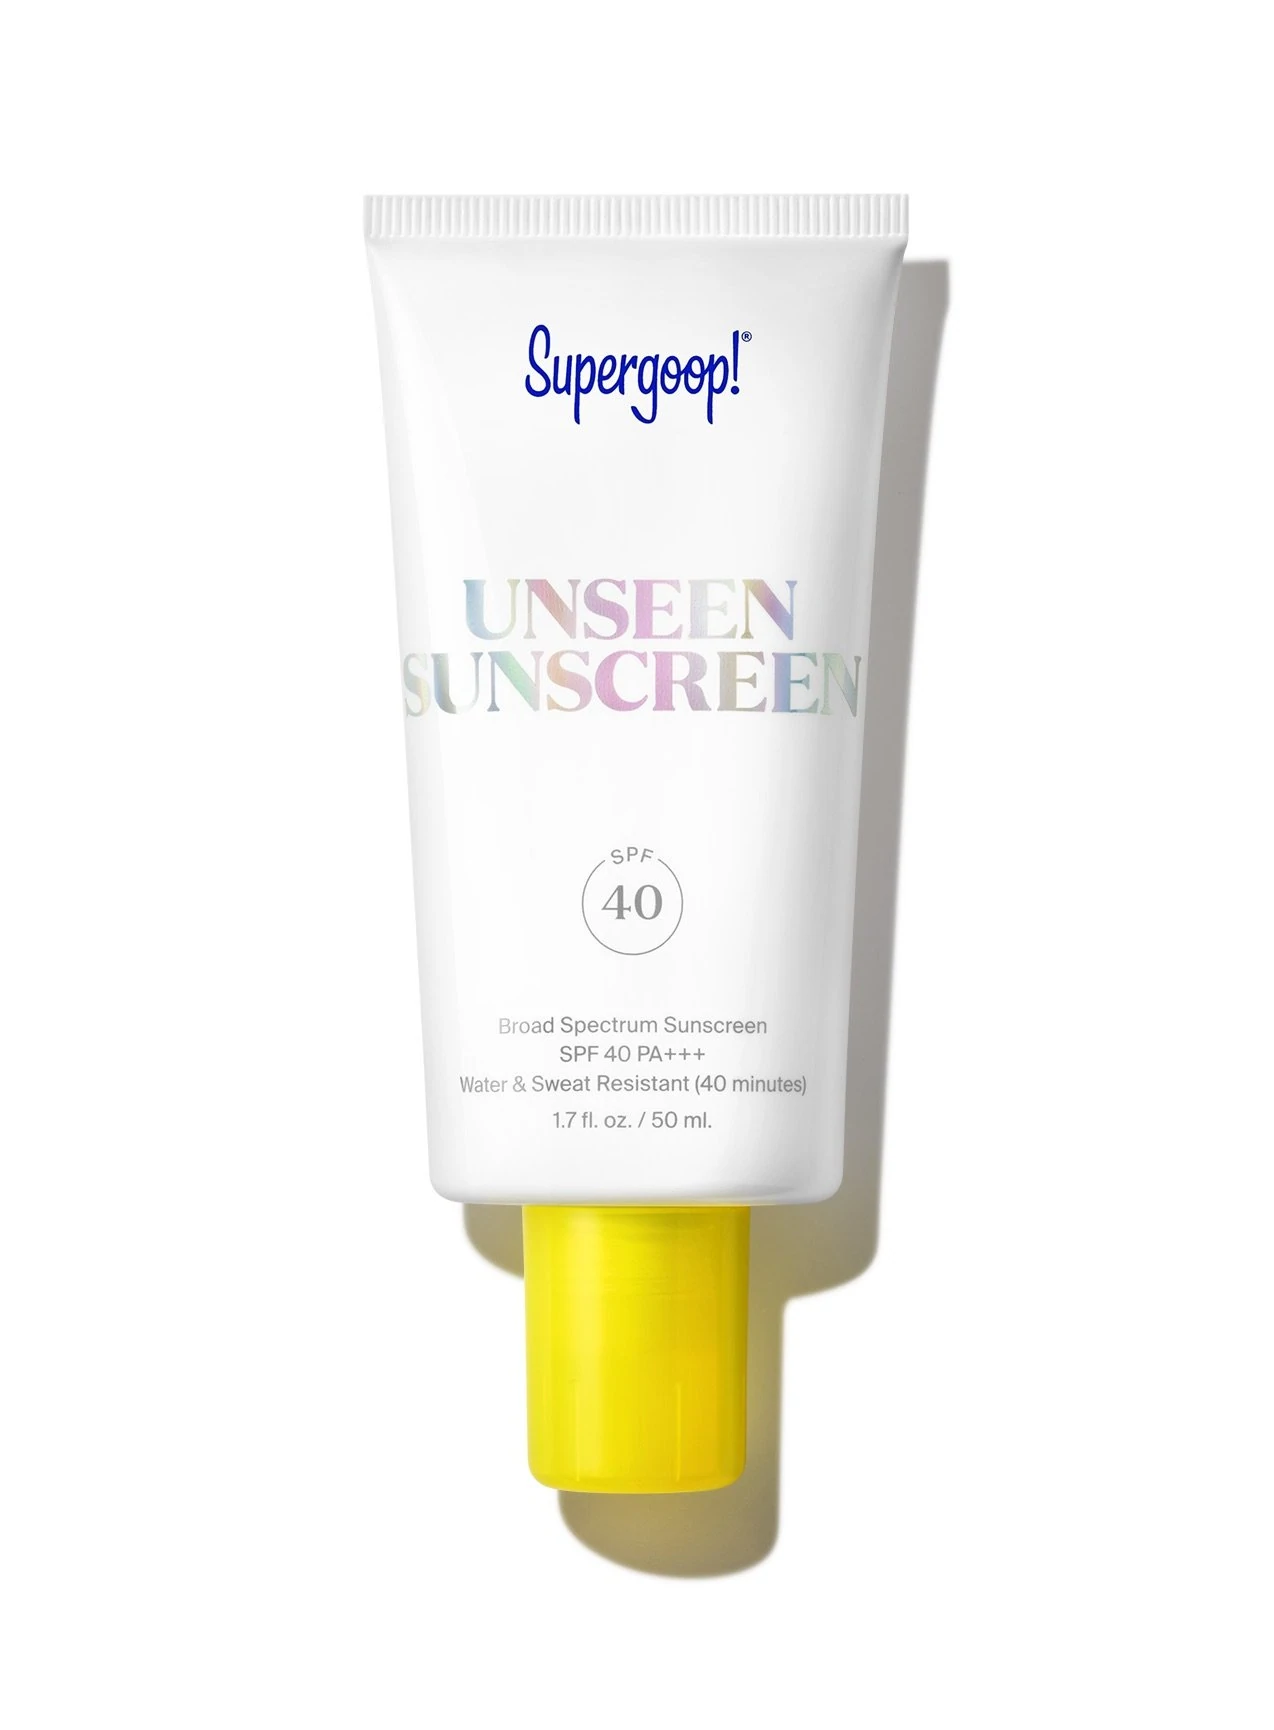 Unseen Sunscreen by Supergoop, the original, totally invisible, weightless, scentless sunscreen with SPF 40 that leaves a velvety finish.